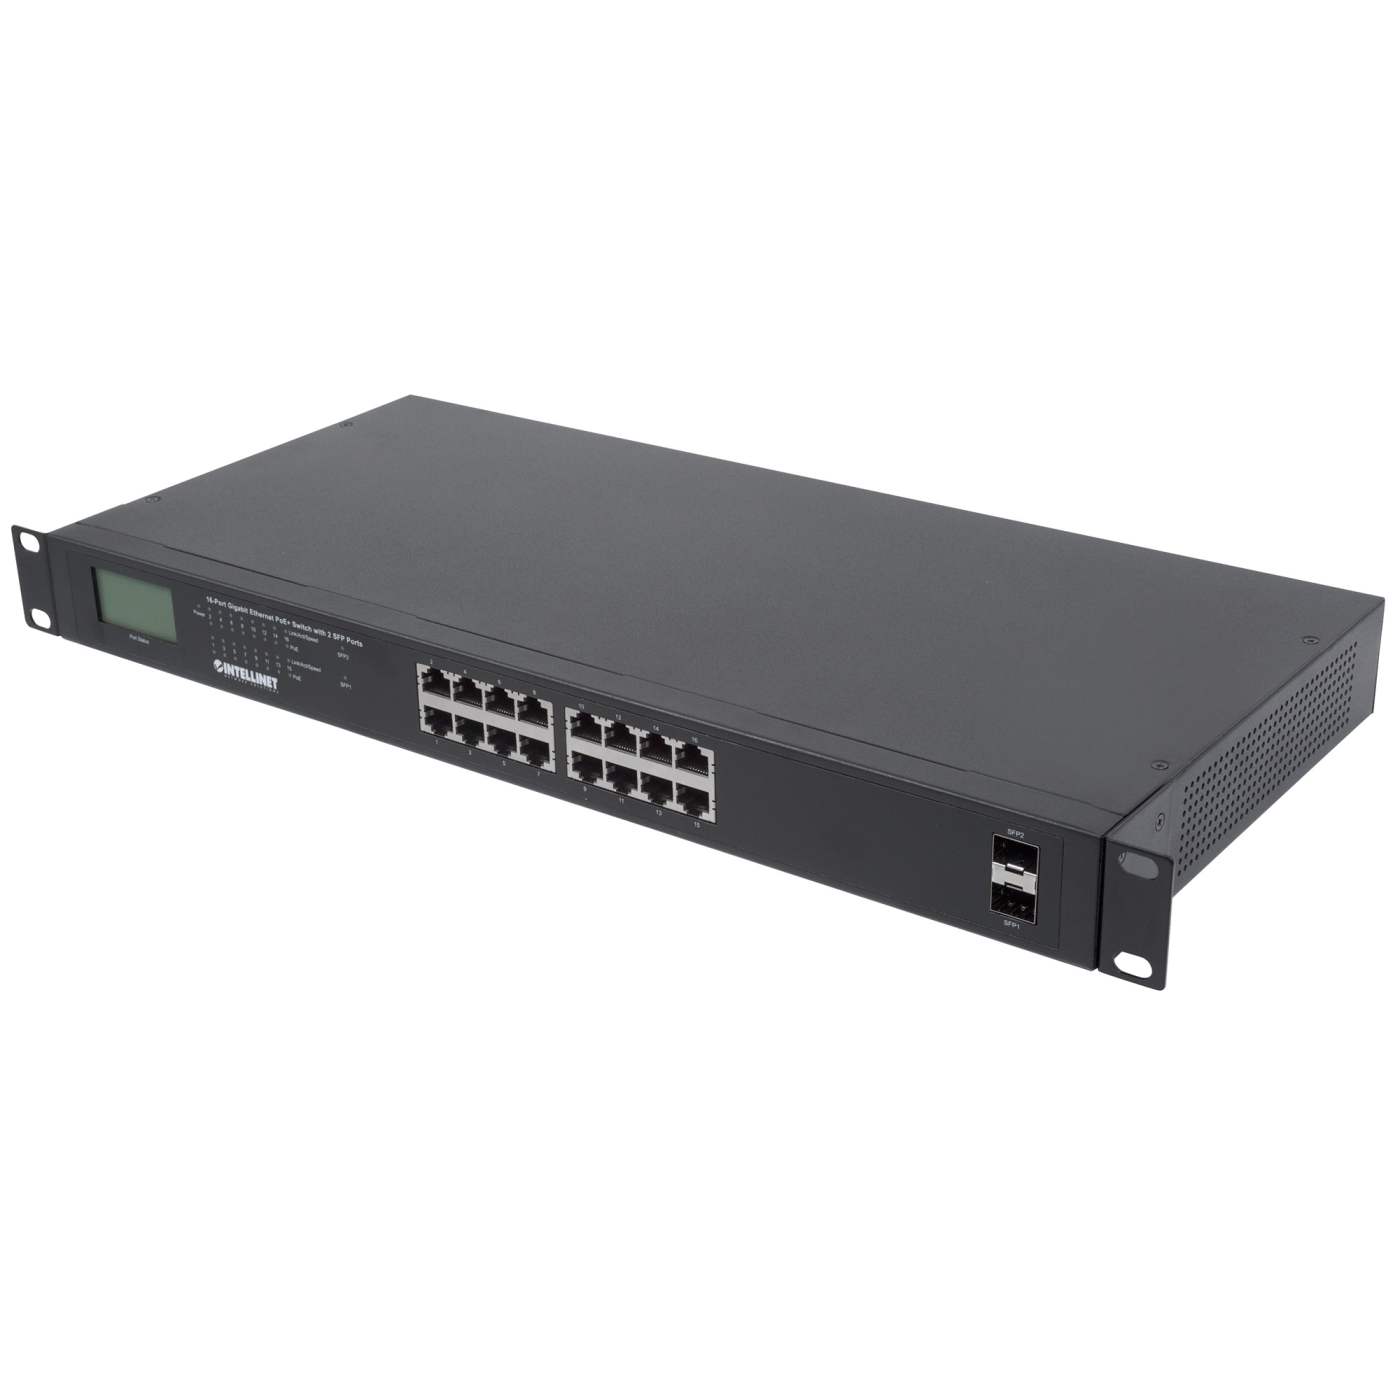 16-Port Gigabit Ethernet PoE+ Switch with 2 SFP Ports and LCD Screen Image 6